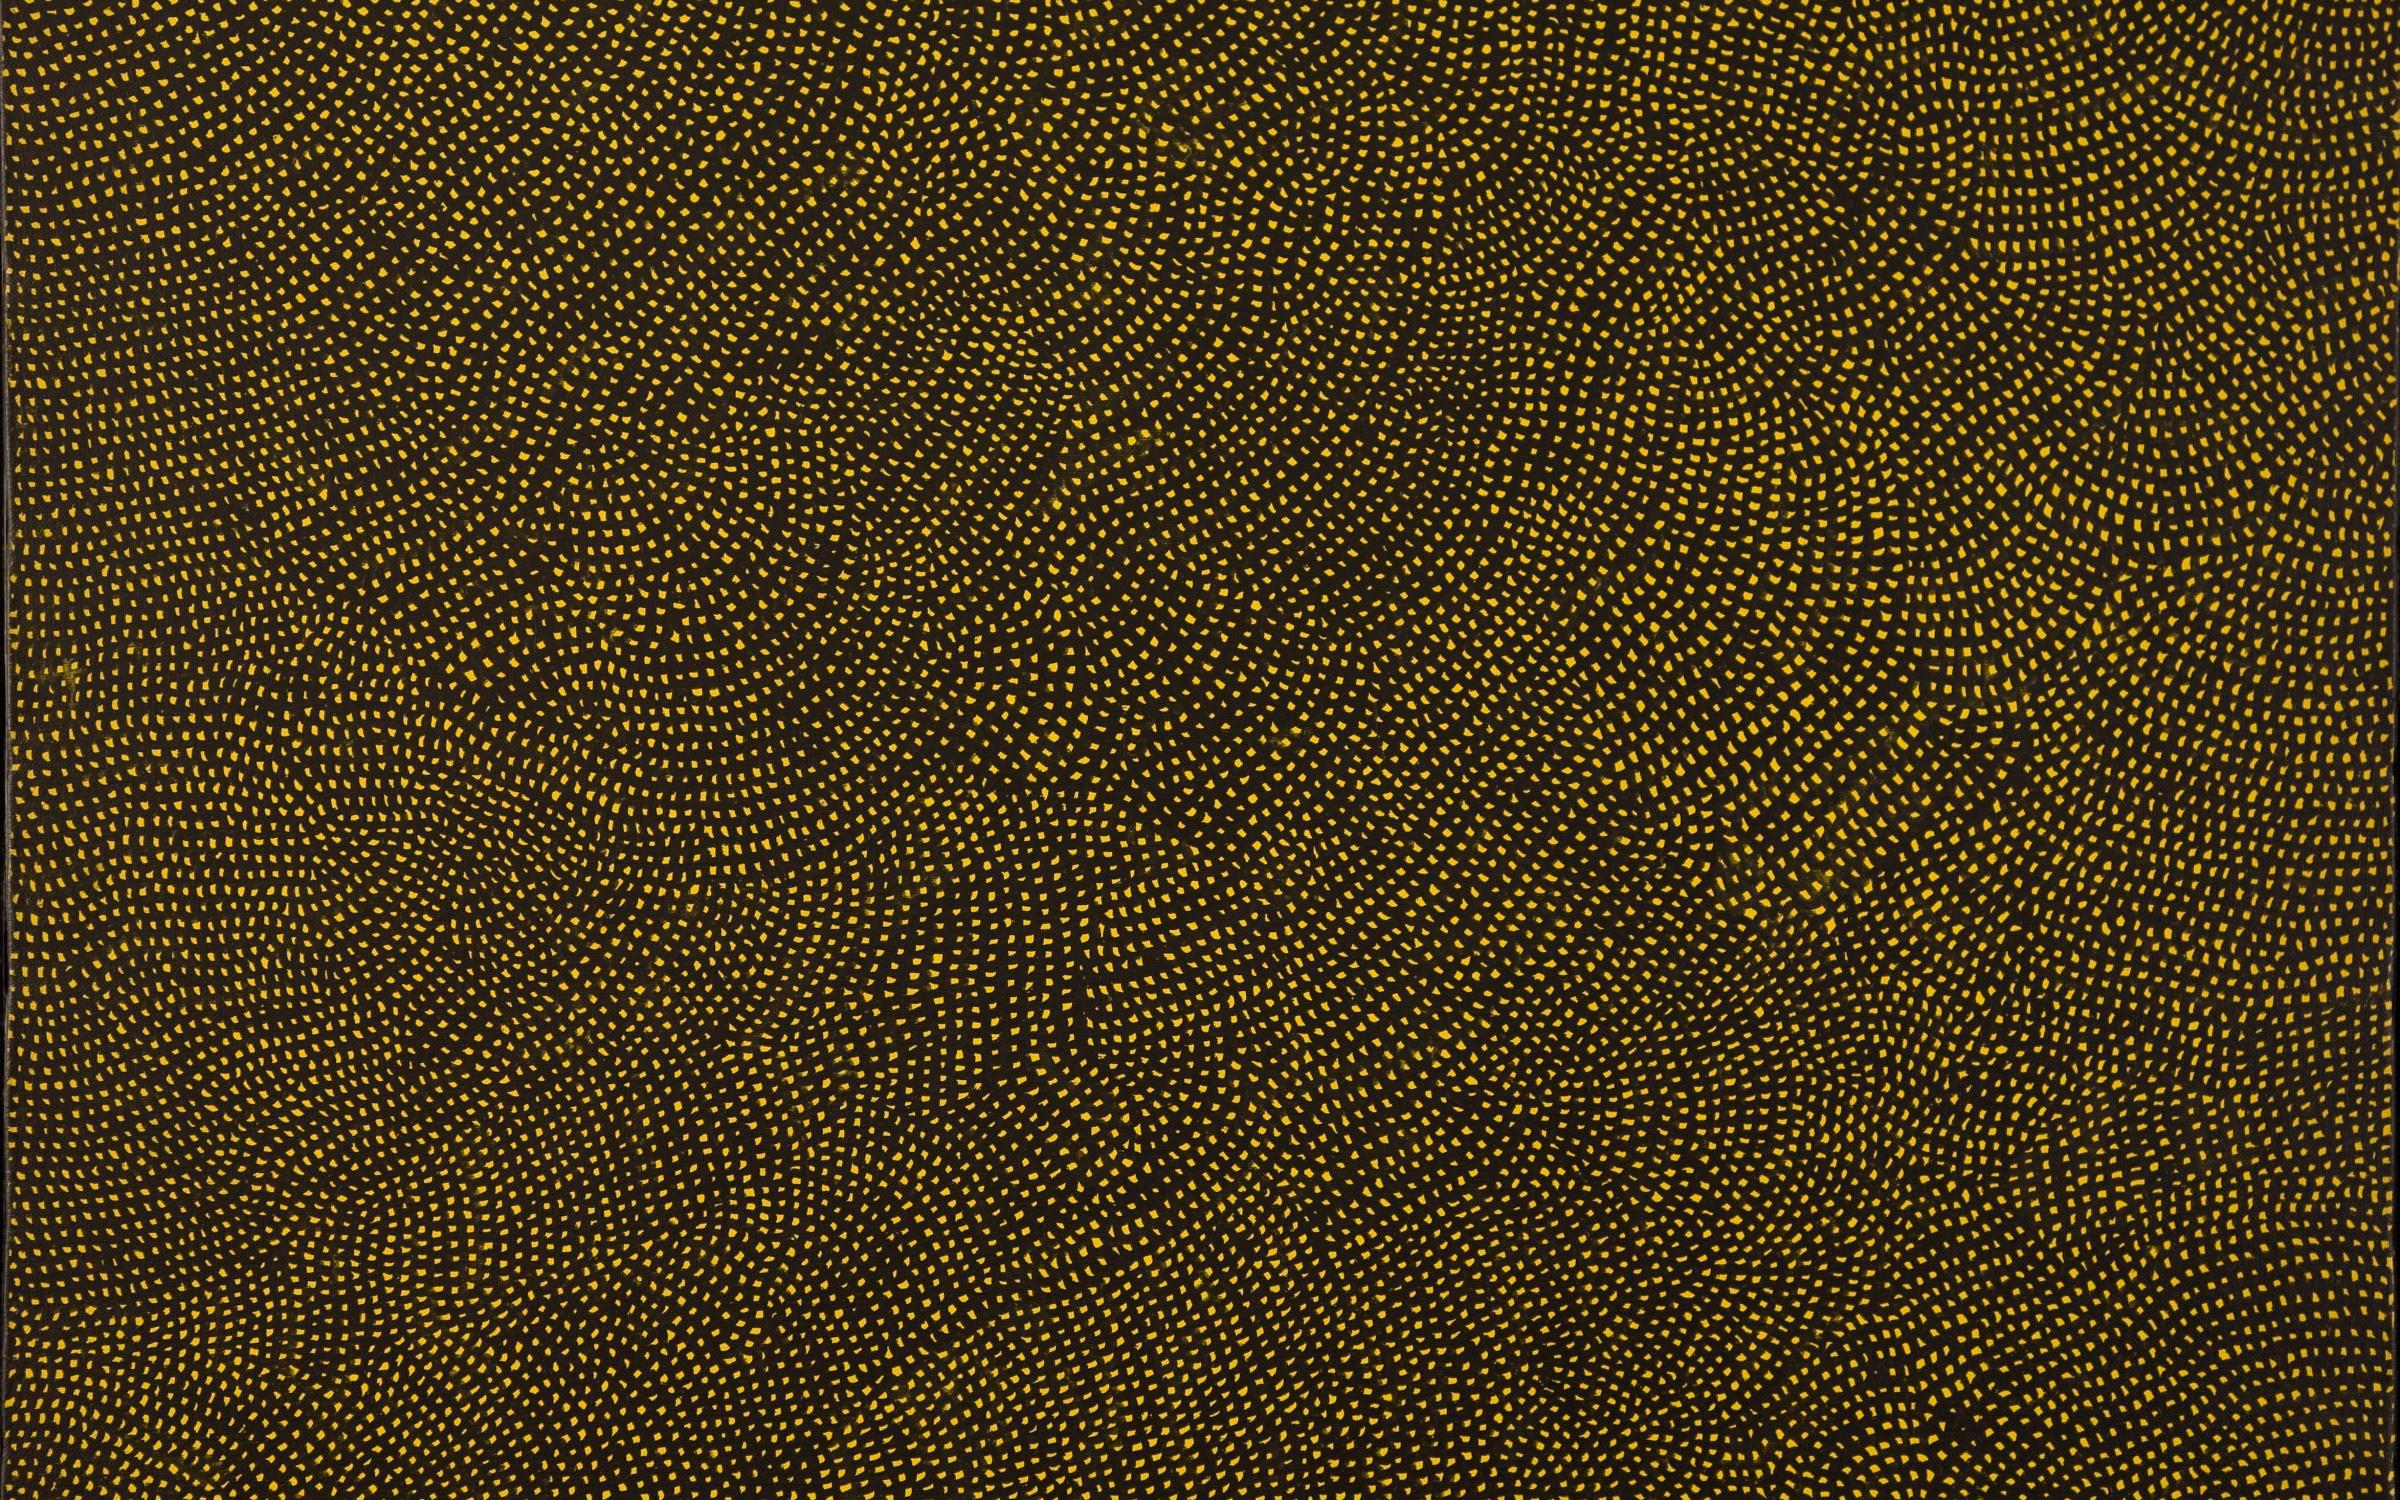 Yayoi Kusama (Japanese, b. 1929) Infinity Nets, 1959, oil on canvas, 28 5/8 x 35 ¾ inches, purchased with funds from The Phyllis Cannon Wattis Endowment Fund, UMFA2011.2.2